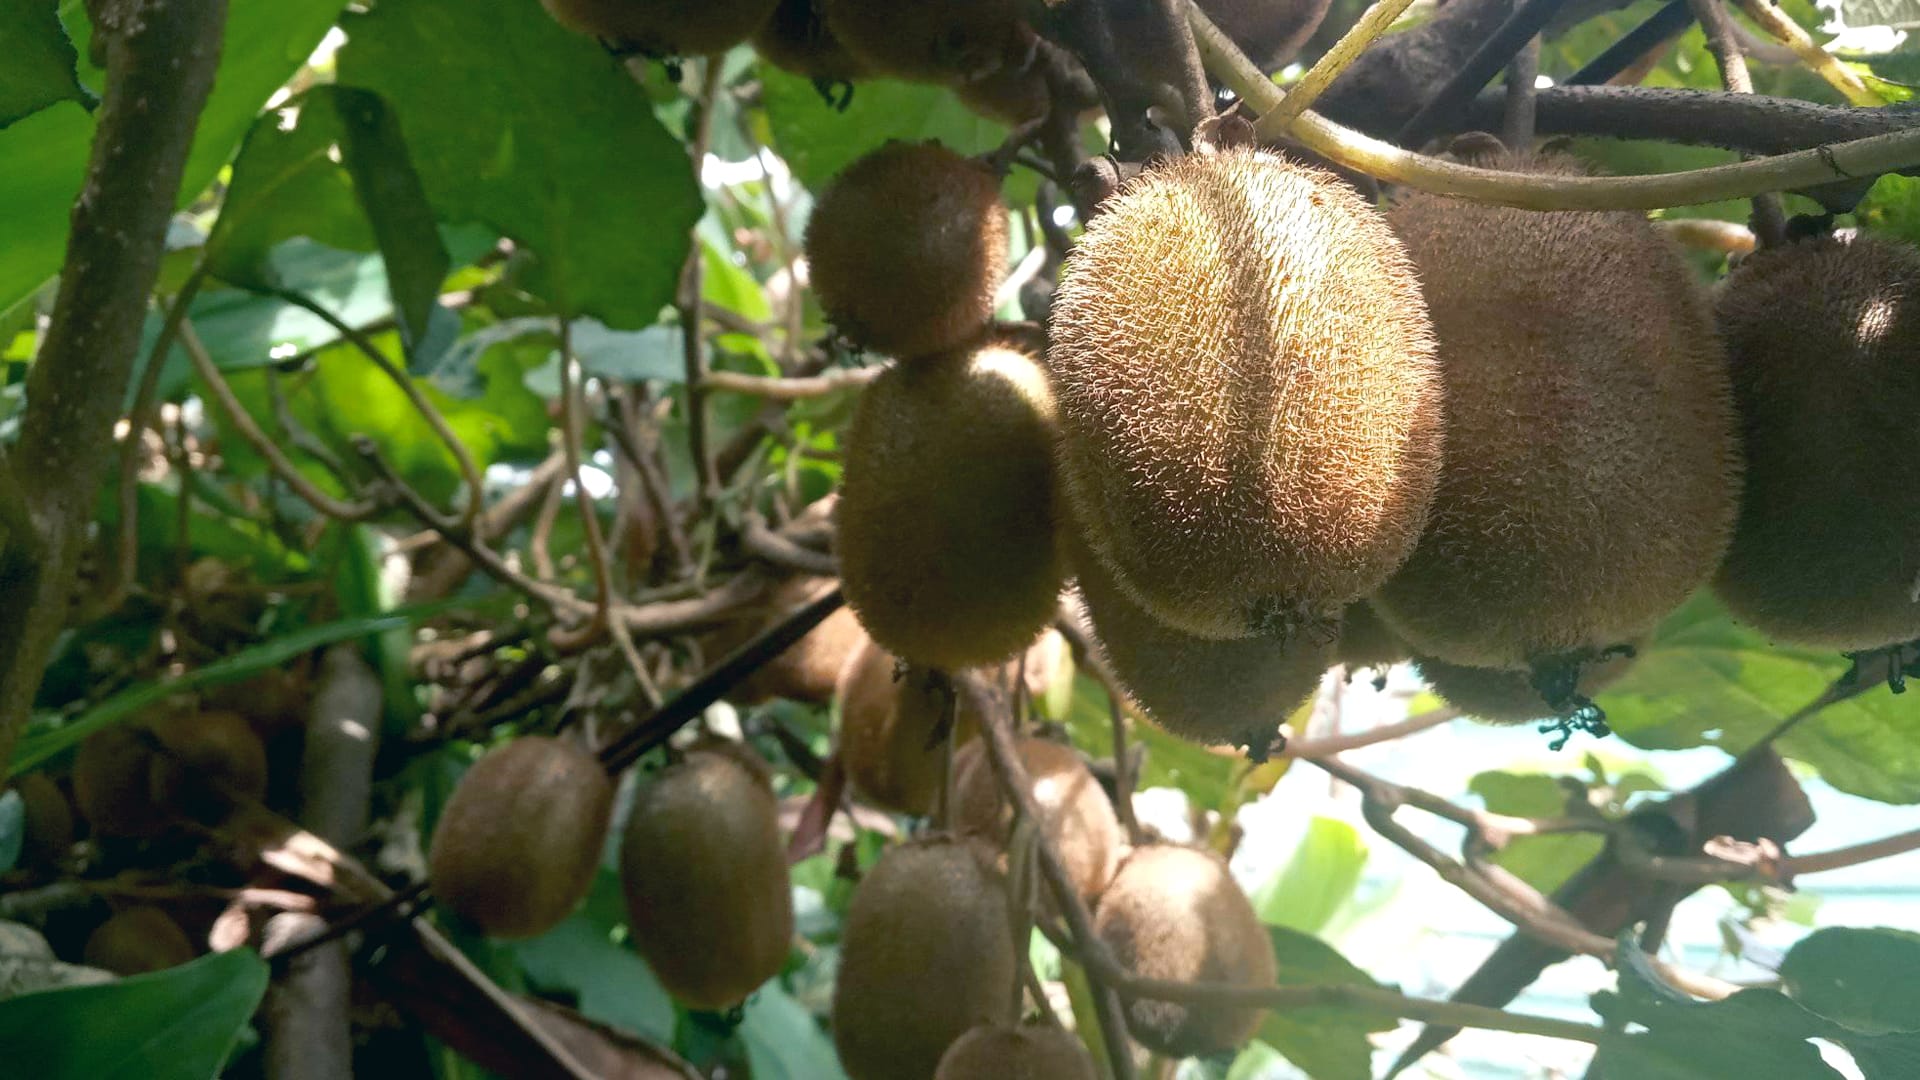 IG Fresh Produce to invest Rs 100 crore in Arunachal Pradesh for Kiwi cultivation